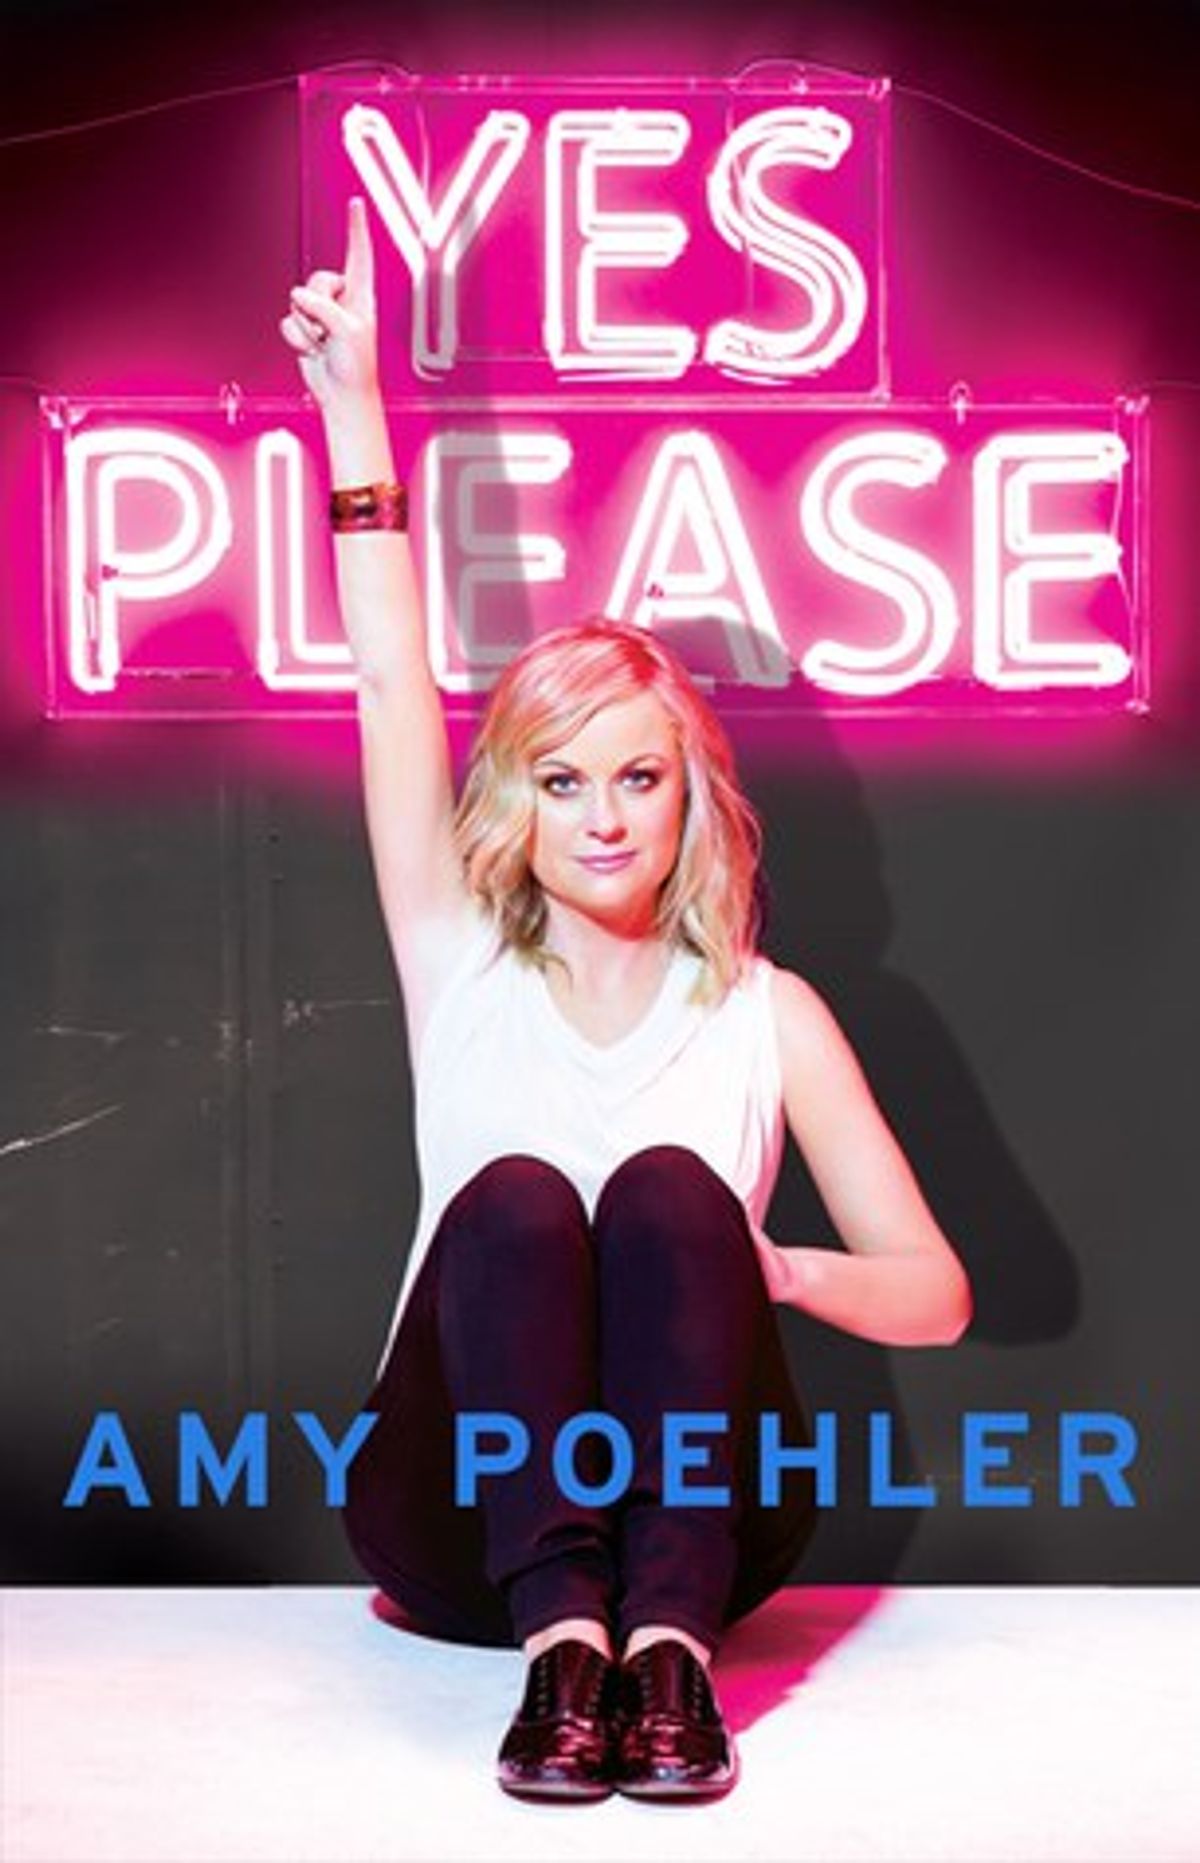 You’re Welcome: My Personal Review Of Amy Poehler’s "Yes Please"